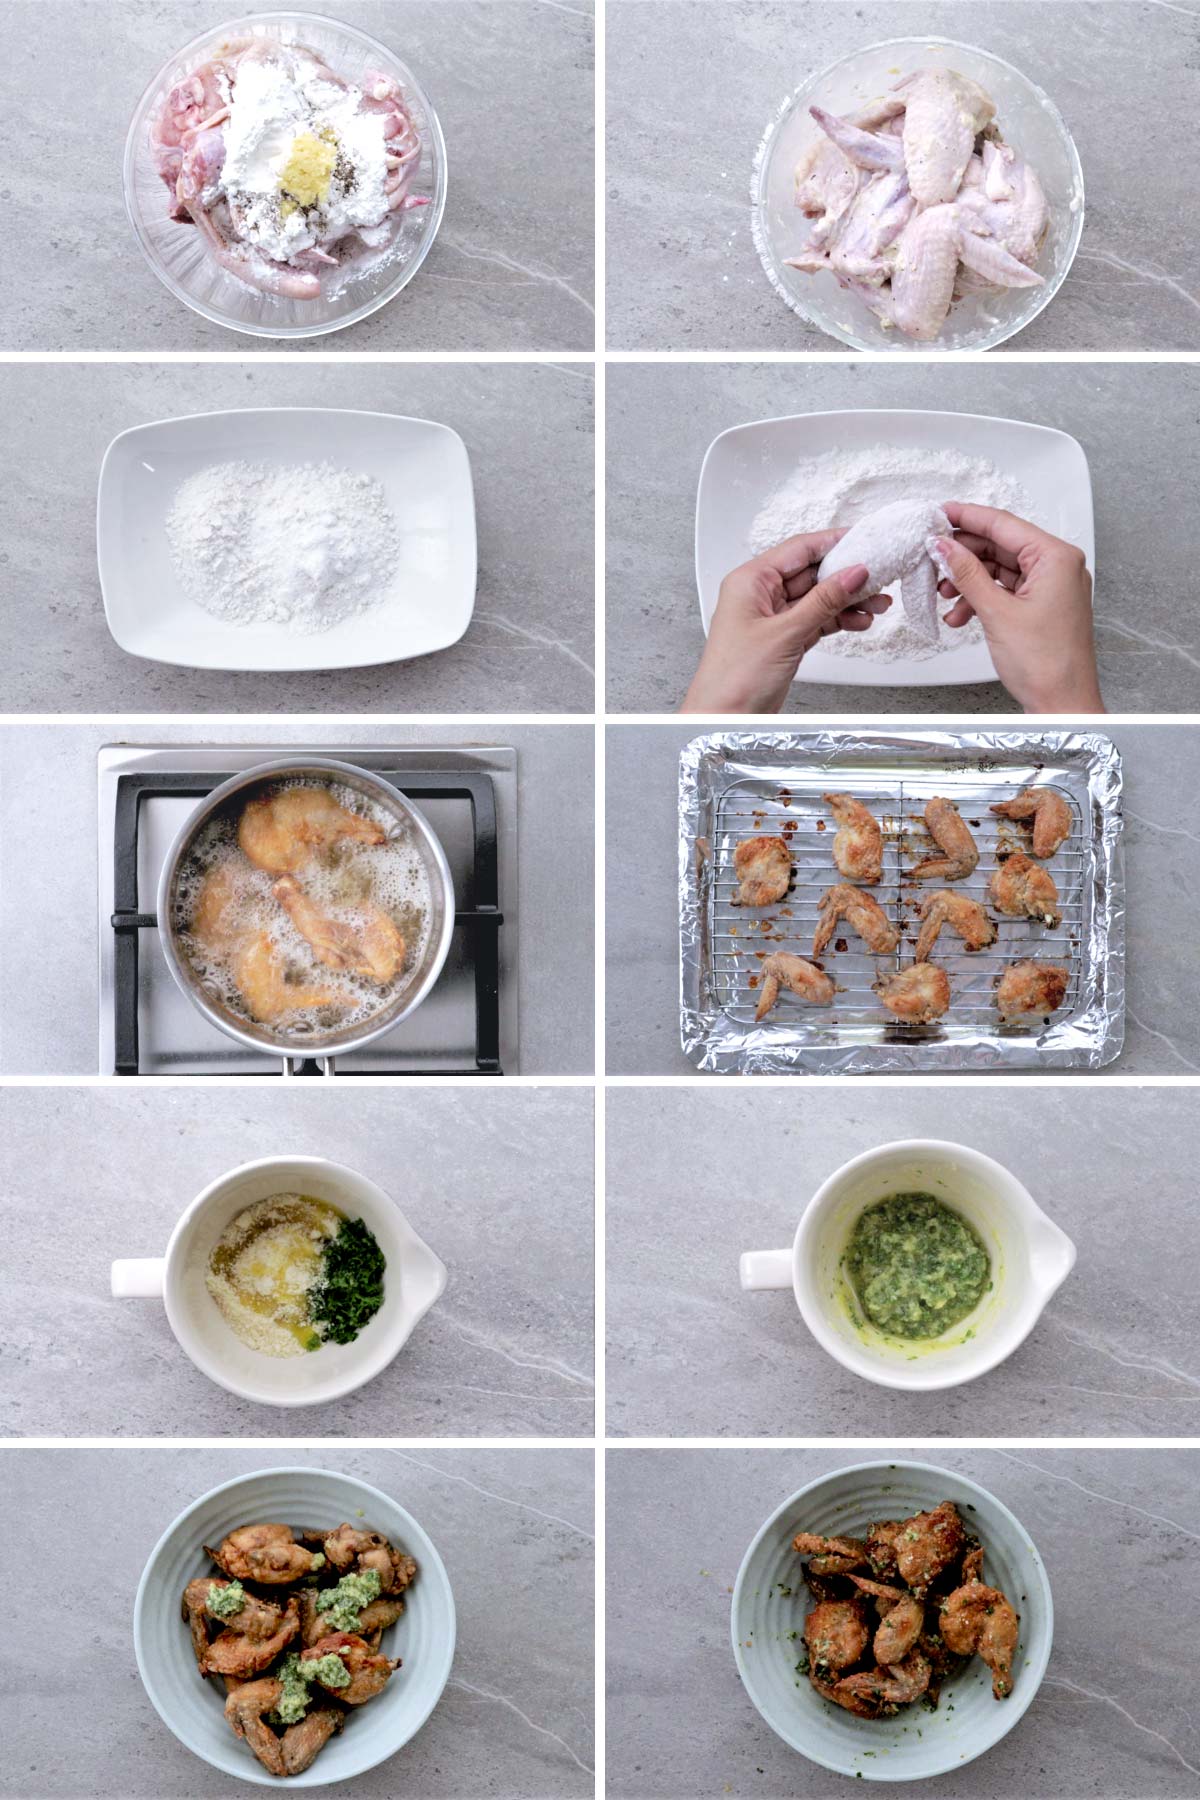 Steps on how to cook Garlic Parmesan Wings.